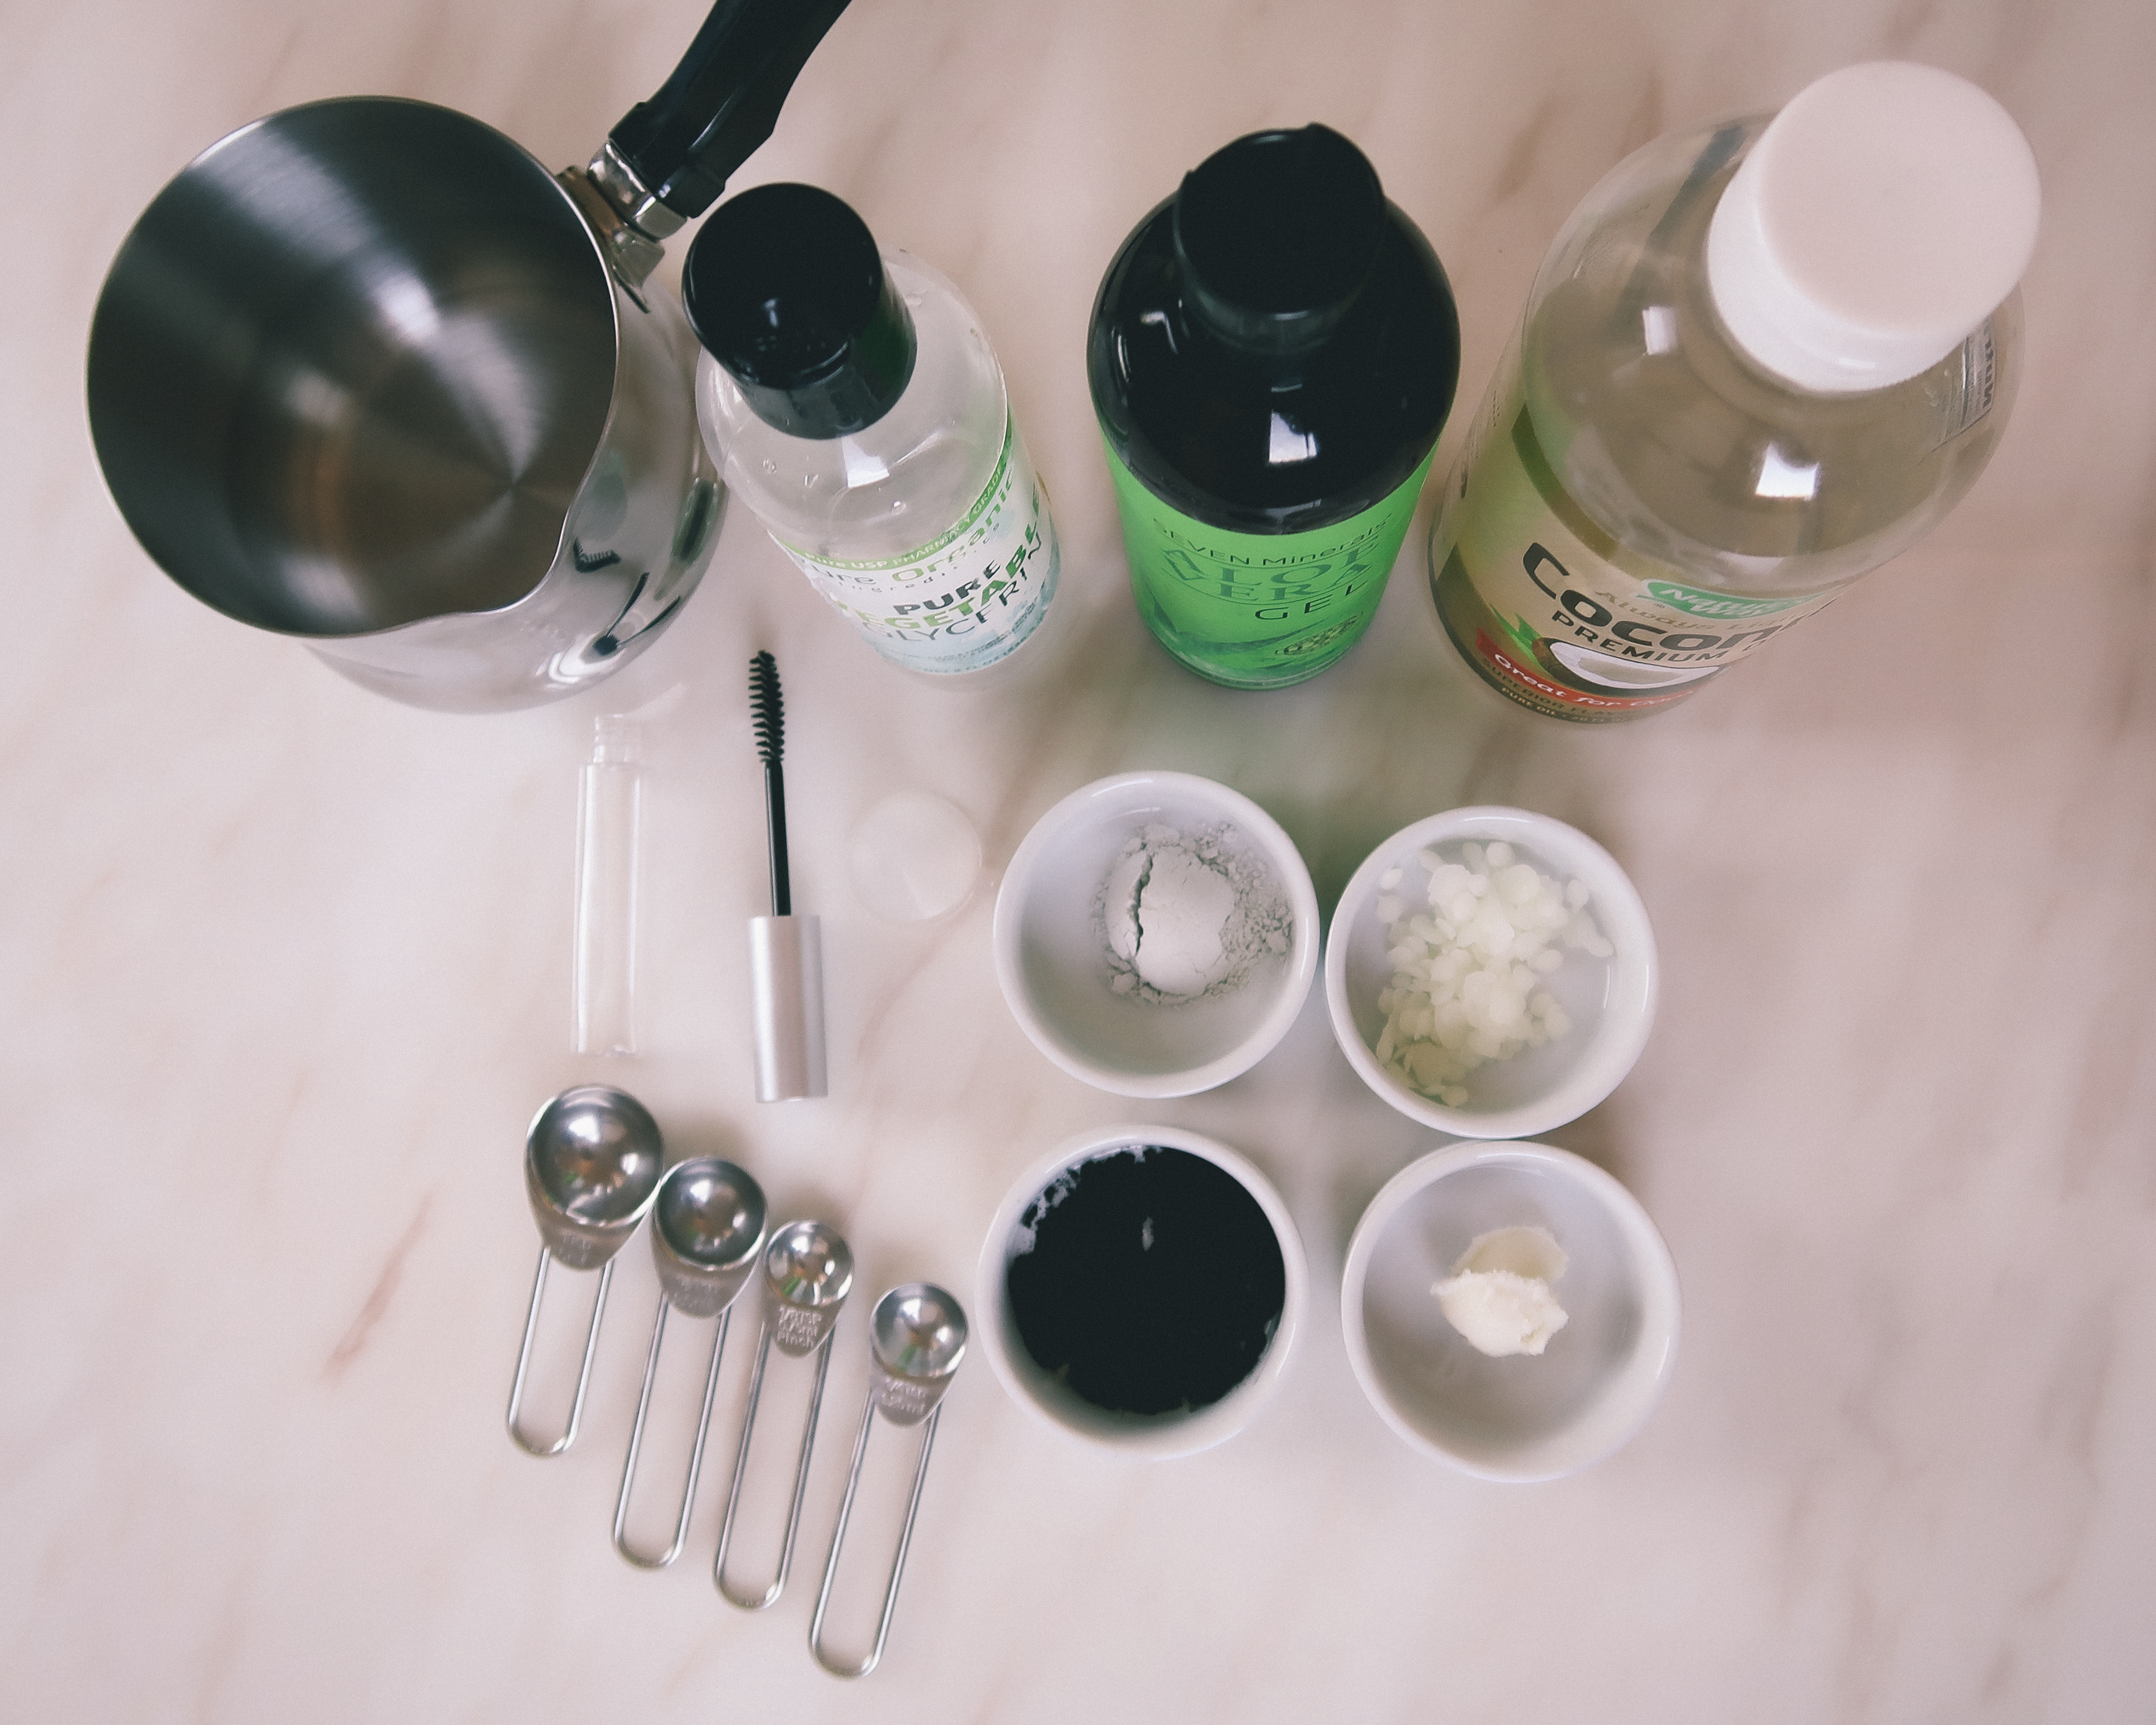 clean mascara ingredients laid out in small ramekins and bottles on white marble along with teaspoons, empty mascara tube and small melting pot